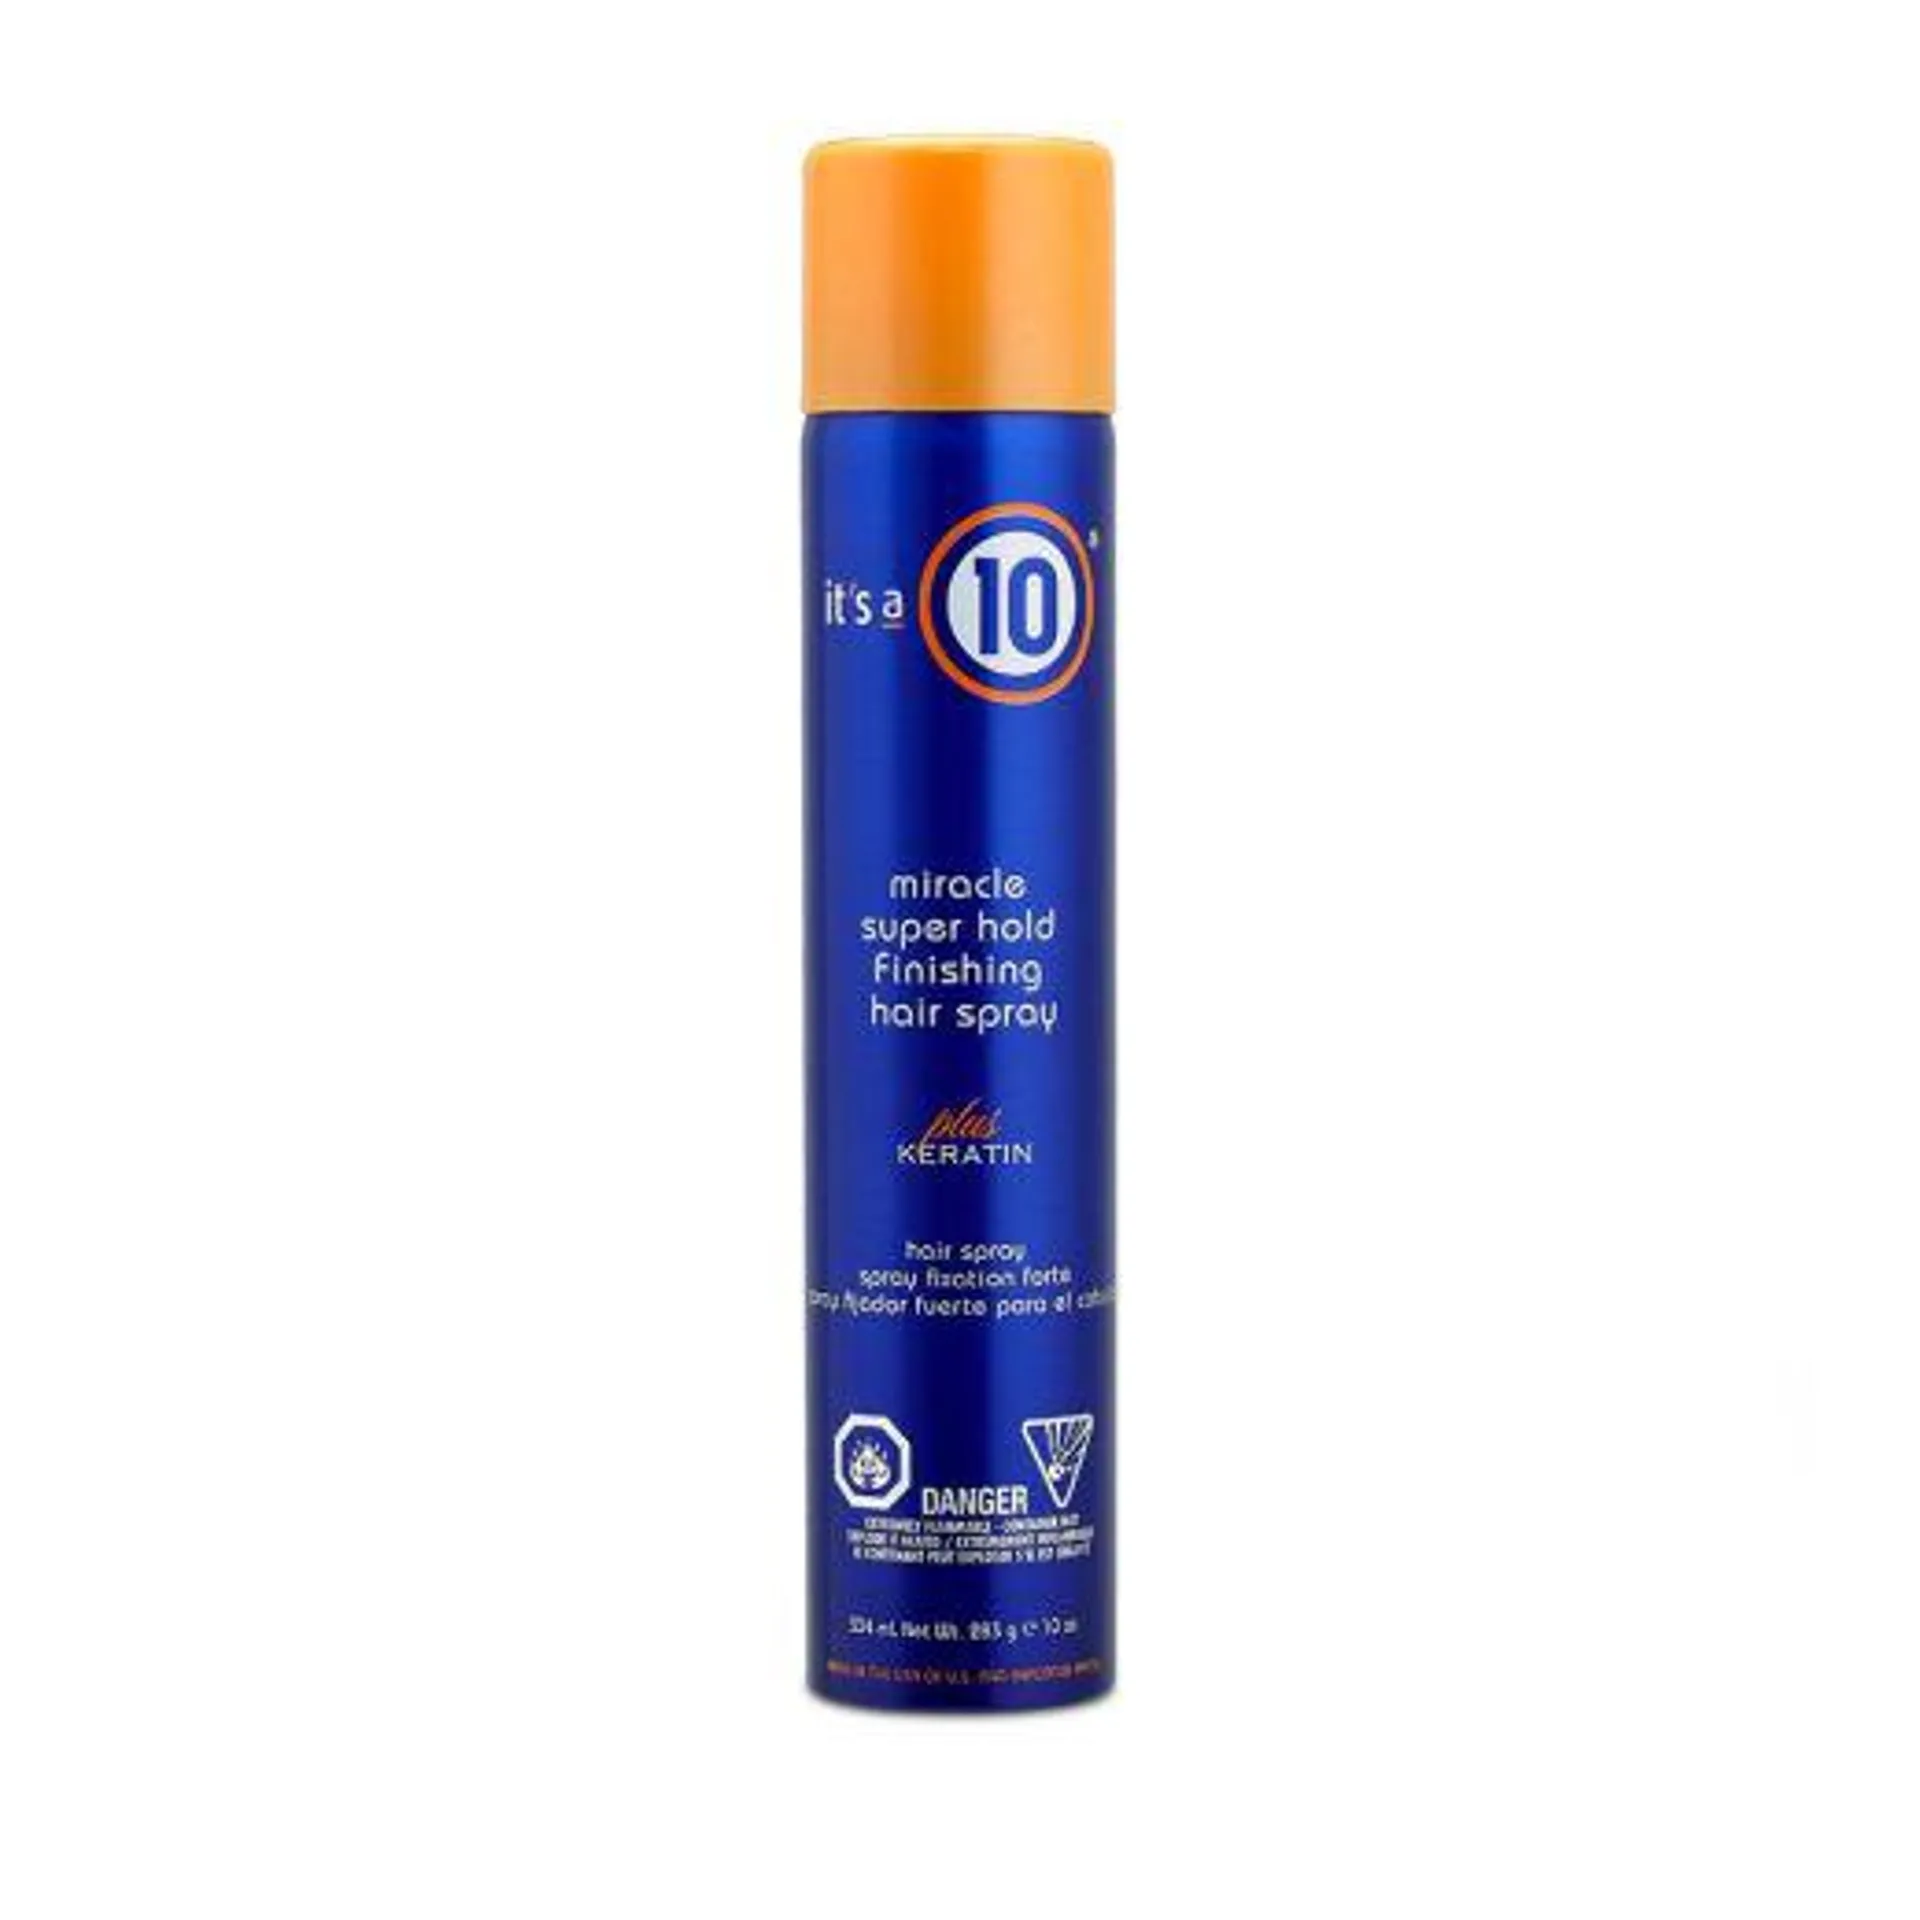 It's a 10 Miracle Super Hold Finishing Spray Plus Keratin 334ml